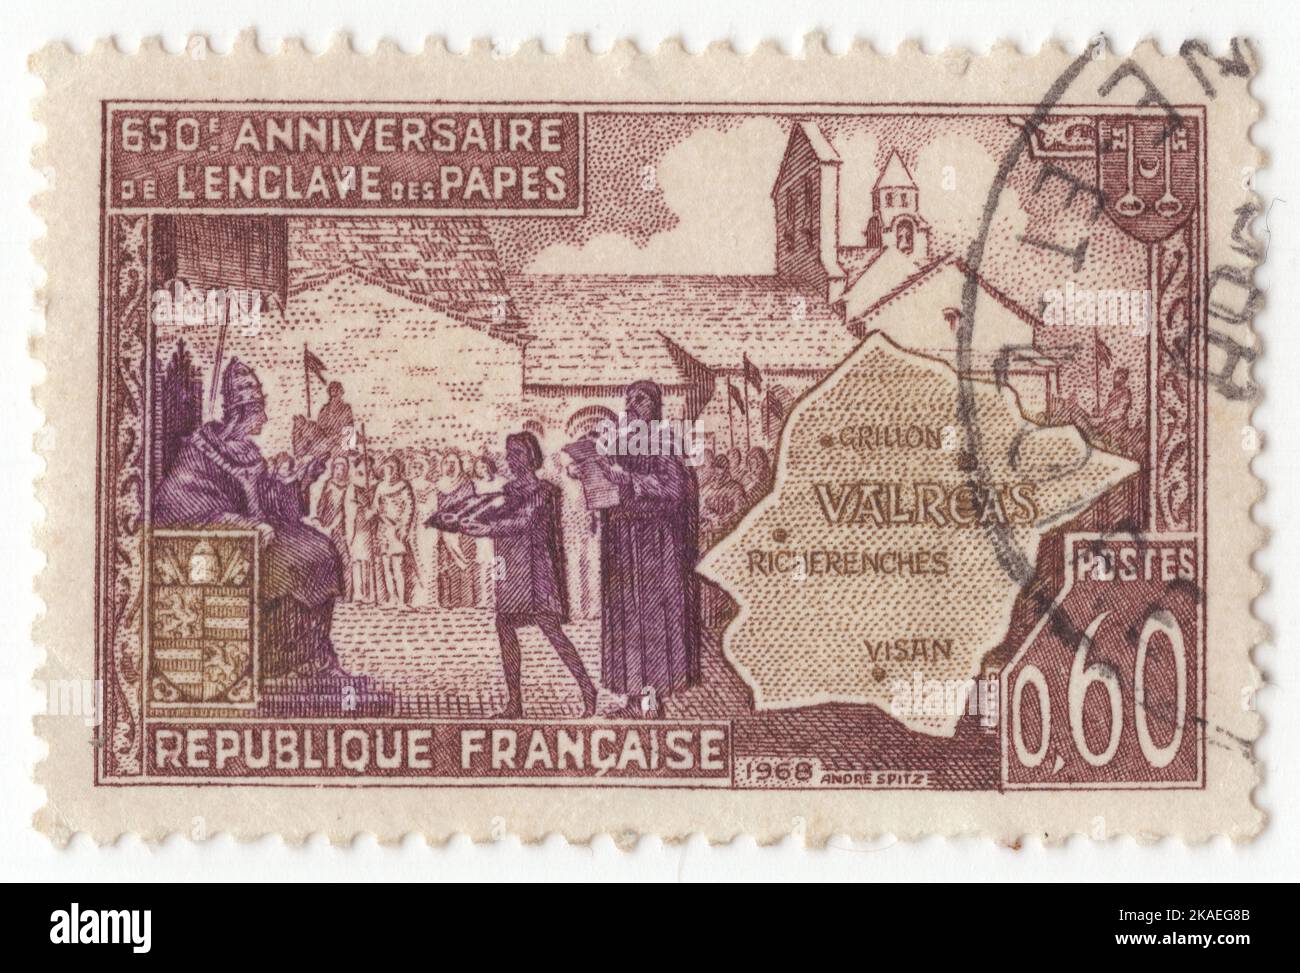 FRANCE - 1968 May 25: An 60 centimes brown, bister-brown and purple postage stamp depicting Map of Papal Enclave, Valreas, and John XXII Receiving Homage. Papal enclave at Valreas, 650th anniversary. The area around the town of Valreas is known as L'Enclave des Papes. It is an enclave of Vaucluse, surrounded by the department of the Drome. The foundation of the Enclave began in 1317 when Pope John XXII bought Valreas for the papacy of Avignon. The story goes that following a visit to Valreas, feeling unwell he was offered some wine from the area Stock Photo